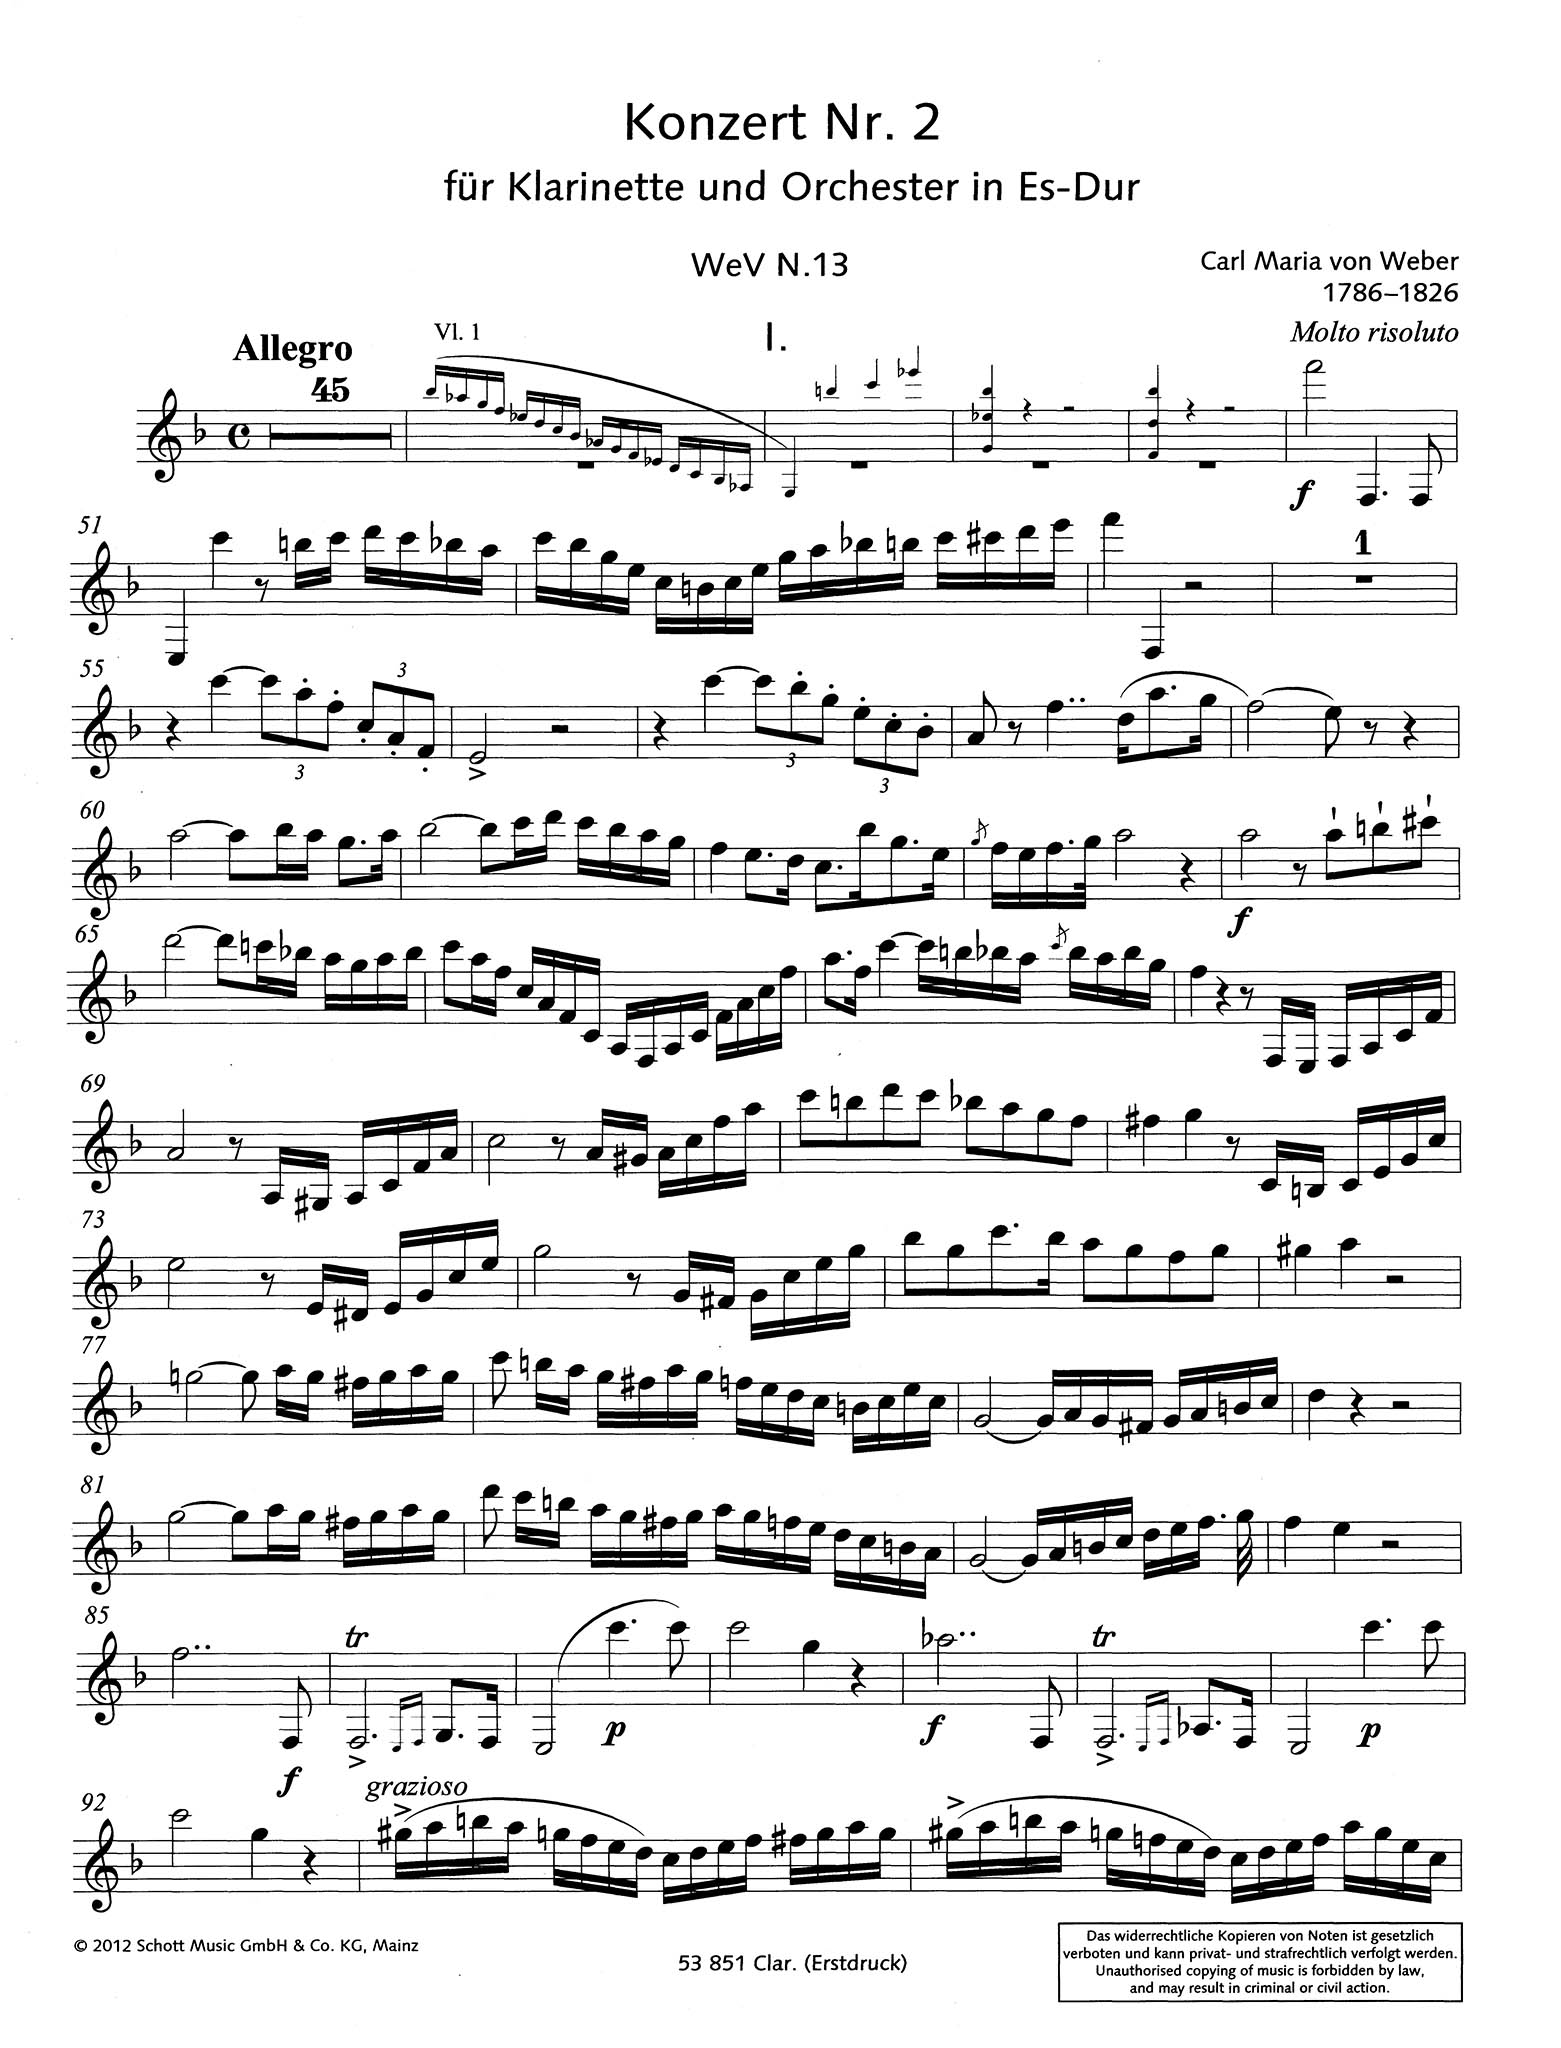 Clarinet Concerto No. 2 in E-flat Major, Op. 74 First Edition Clarinet part